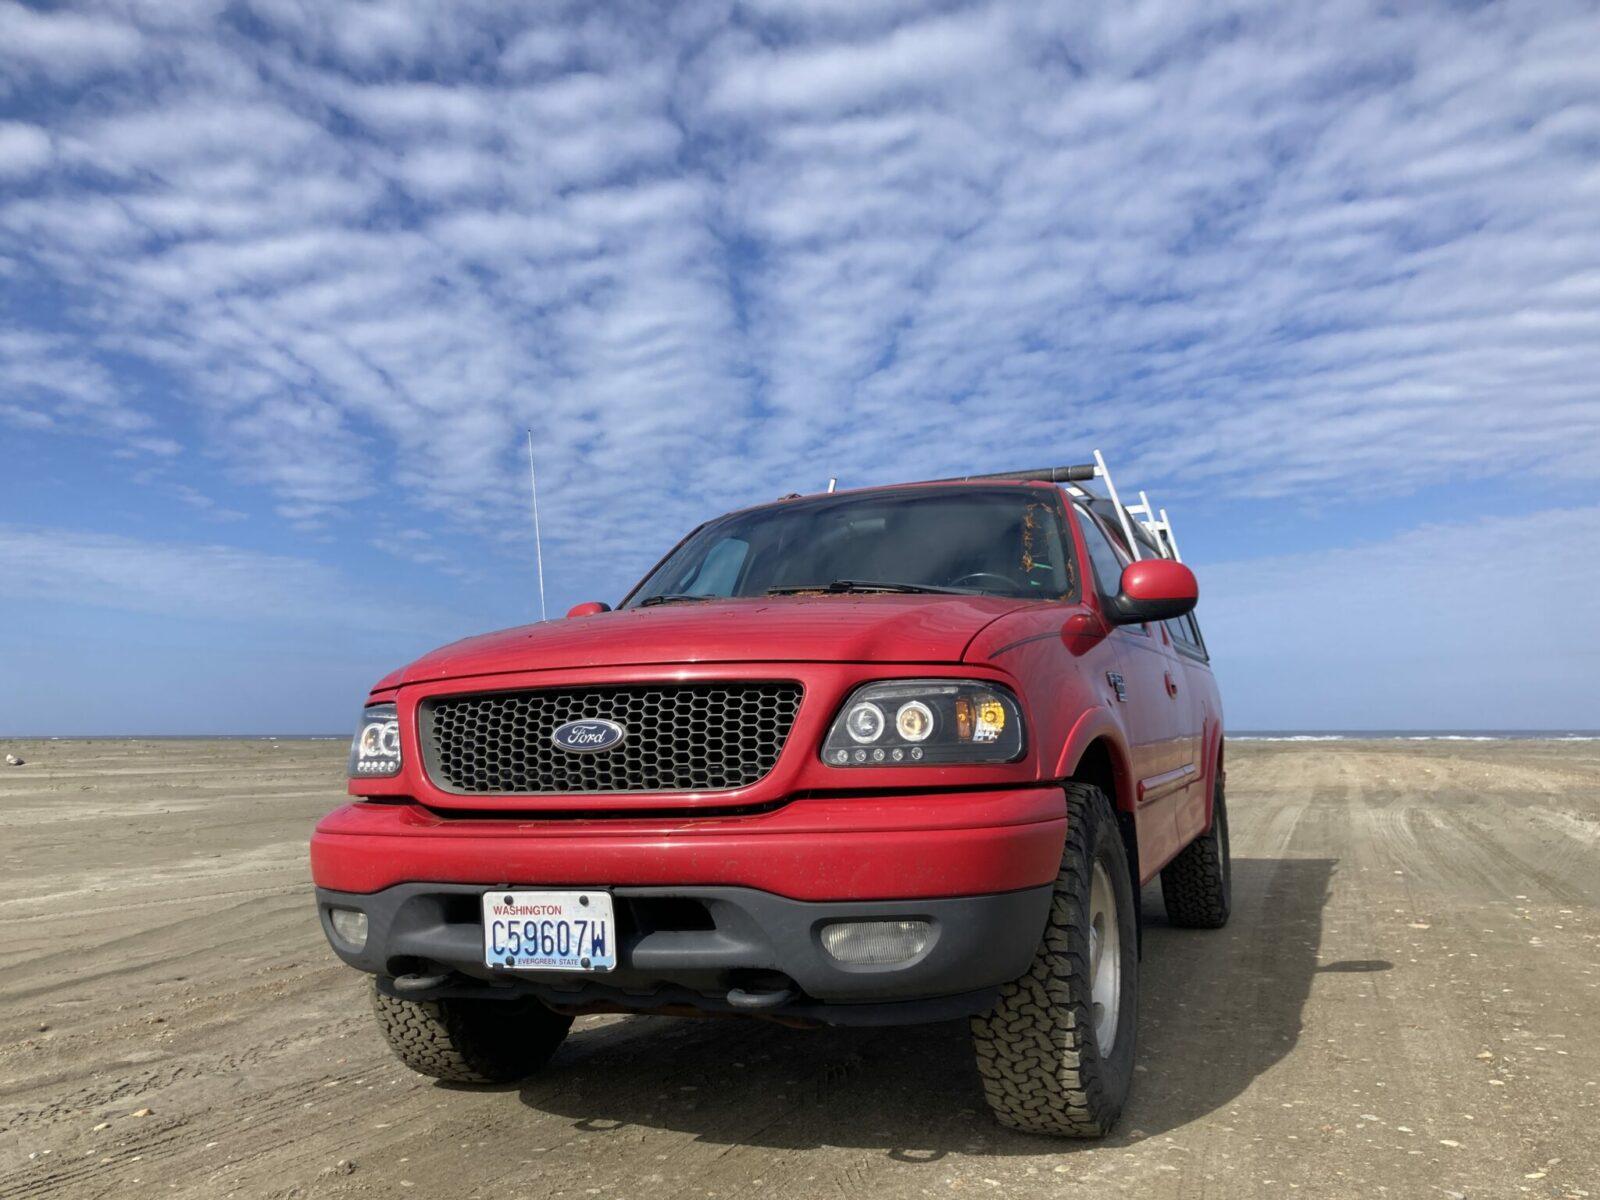 A close up of a bright red pickup truck on the sand at the beach on a sunny day.